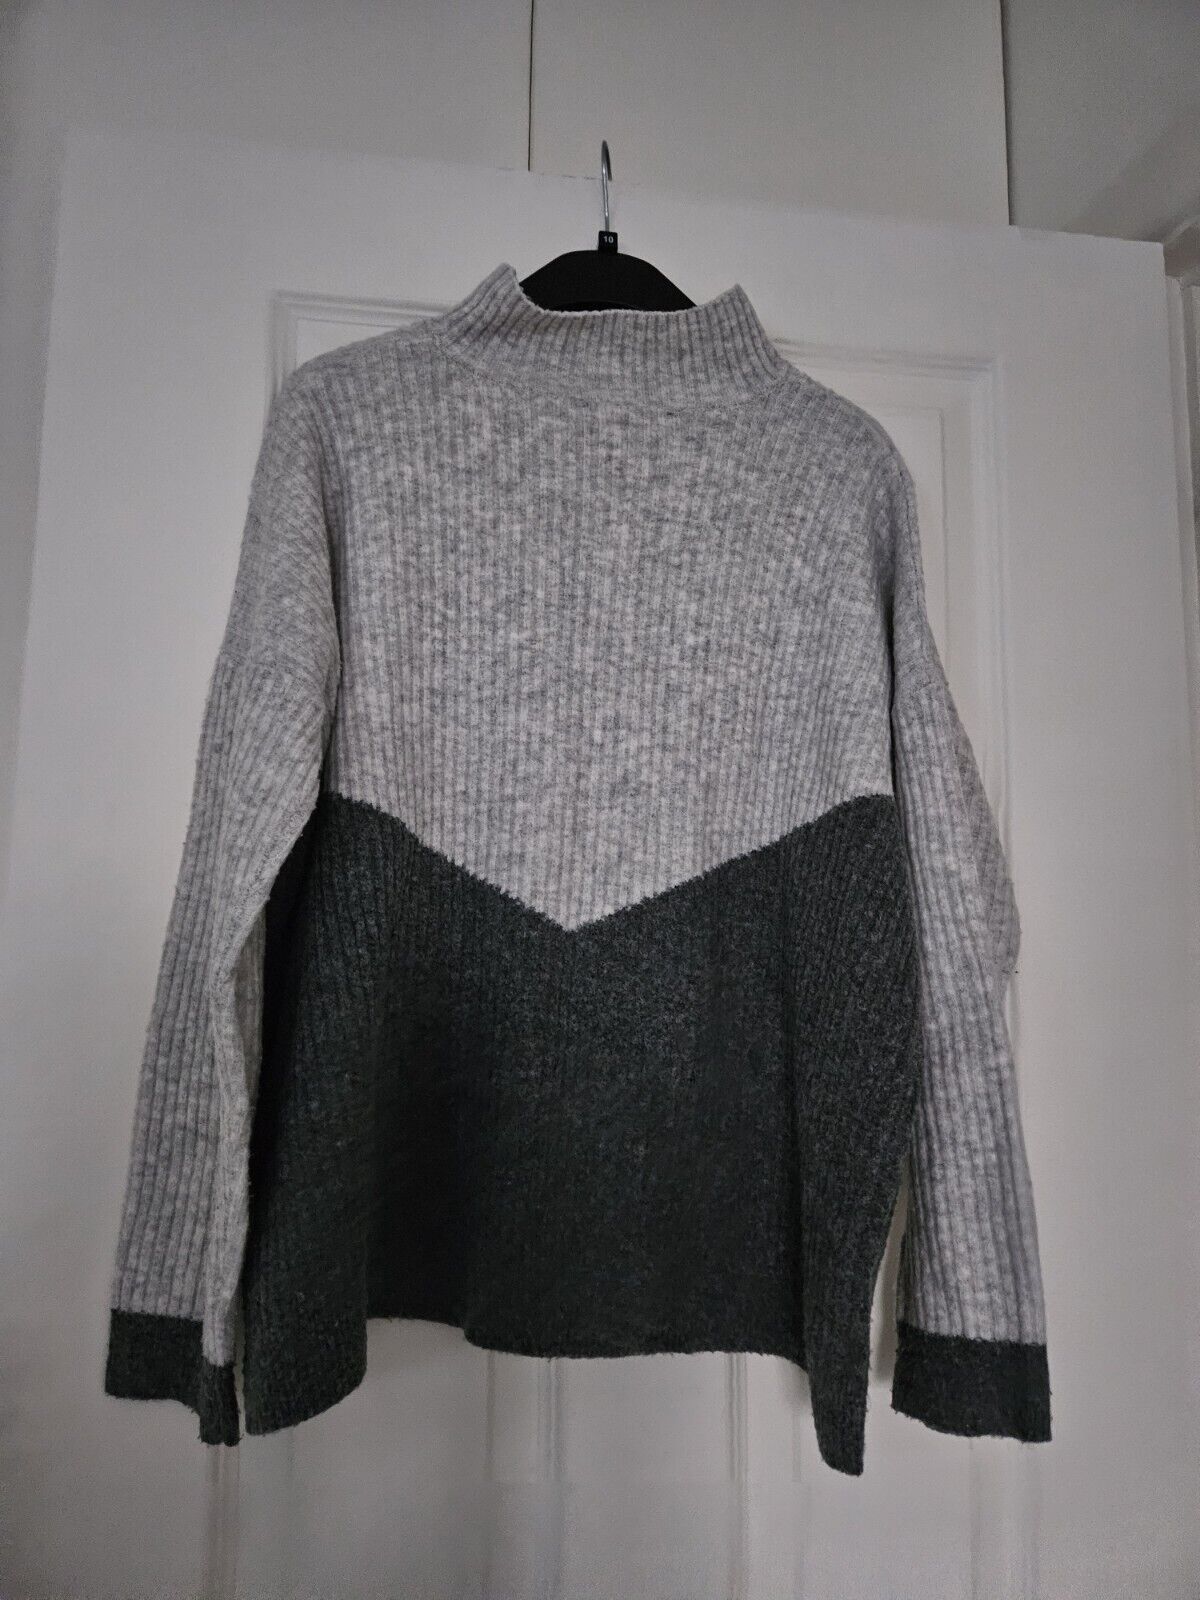 New Ladies M&S Collection Thick Knit Grey Jumper Top Size M / 12 | eBay